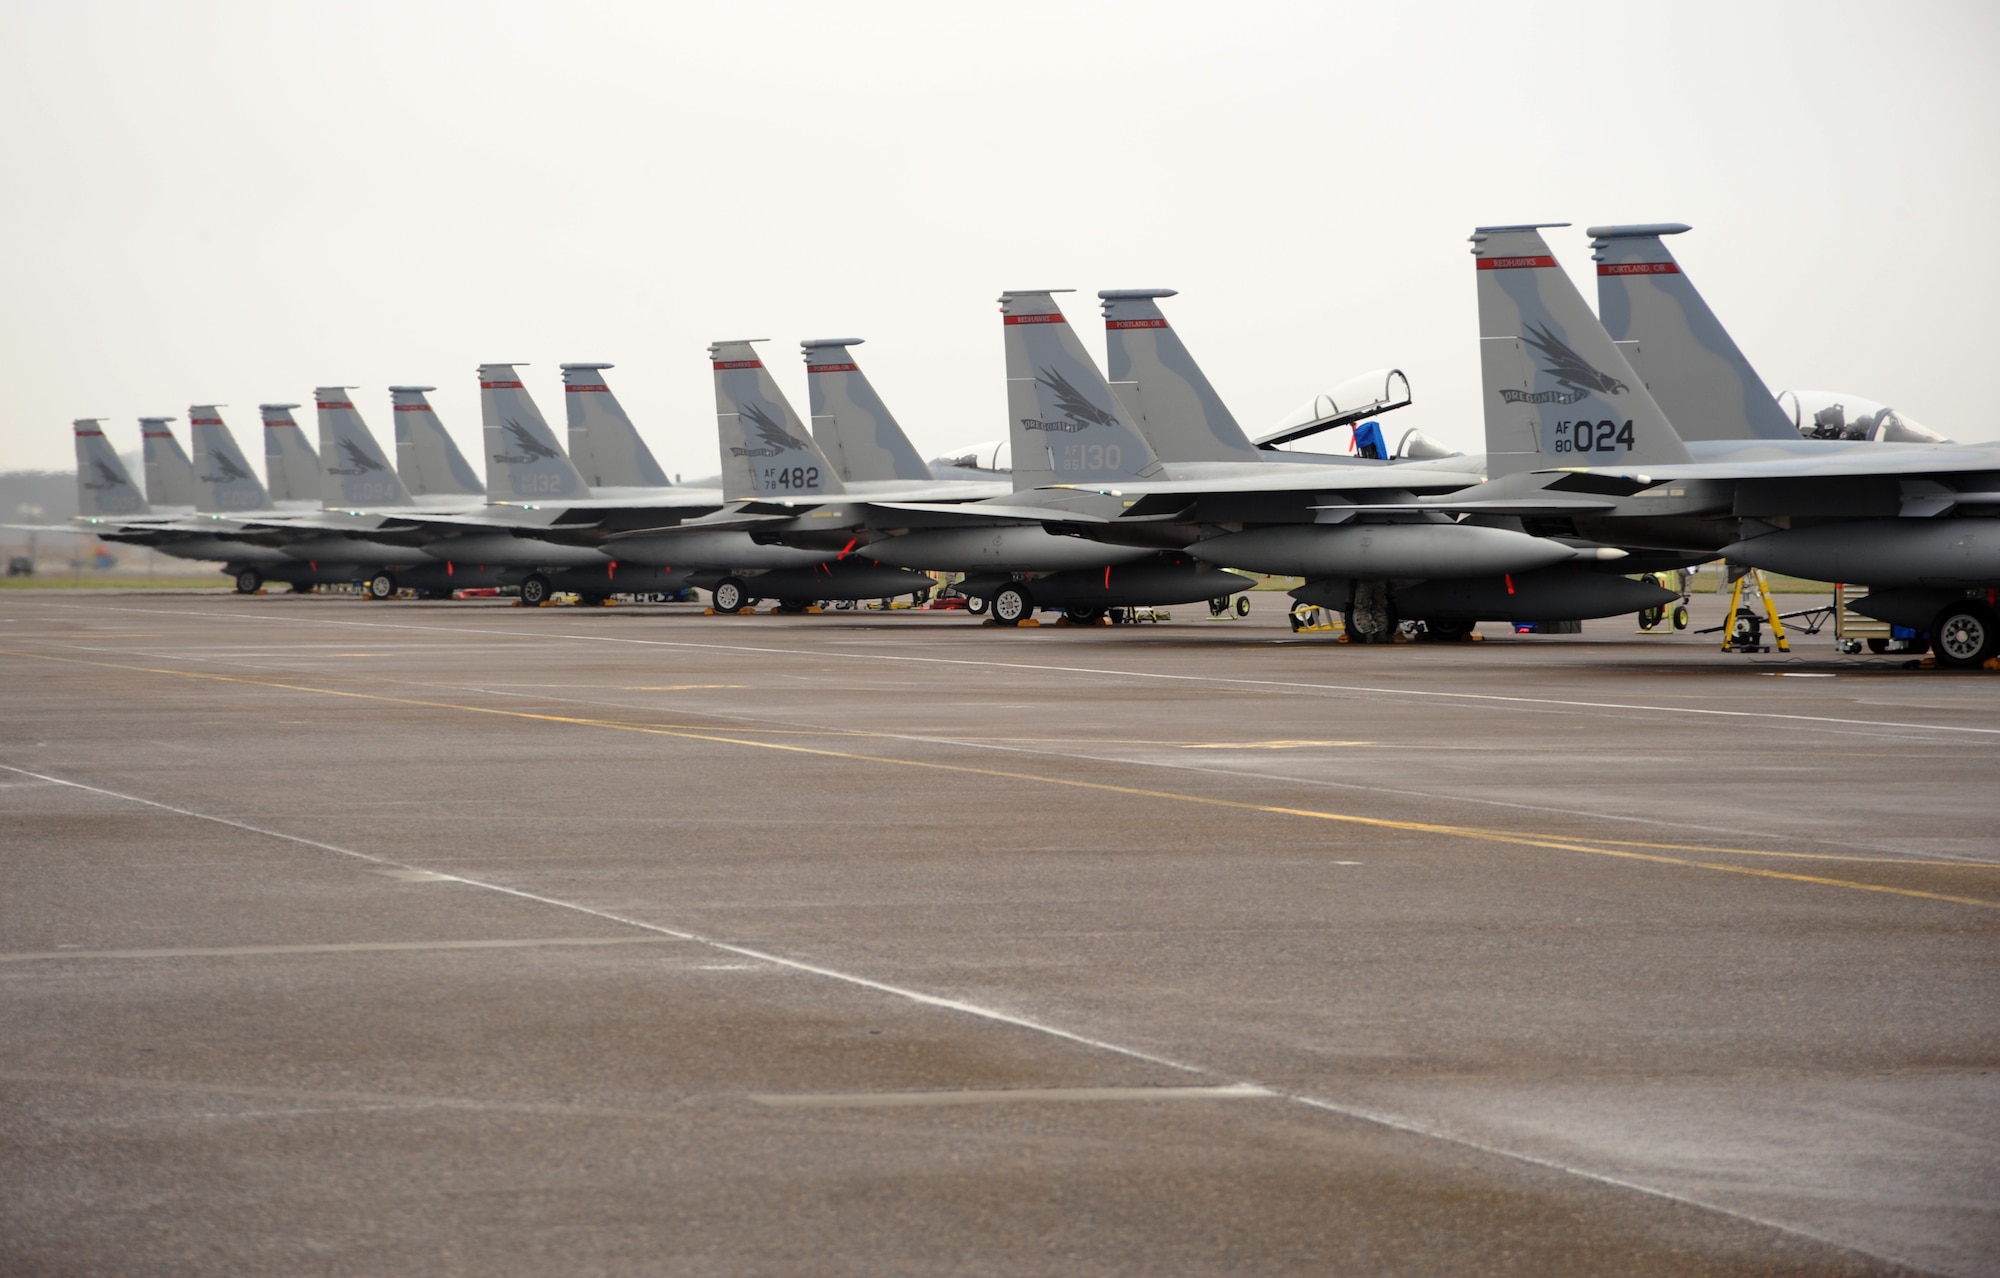 A view of the Portland Air National Guard Base, Ore., ramp with F-15 Eagles lined up on March 6, 2011, prior to new aircraft shelters being assembled in 2014. The new shelters will protect the airframes from sunlight, rain, snow and other environmental elements. (U.S. Air National Guard photo by Tech. Sgt. John Hughel, 142nd Fighter Wing Public Affairs/Released)